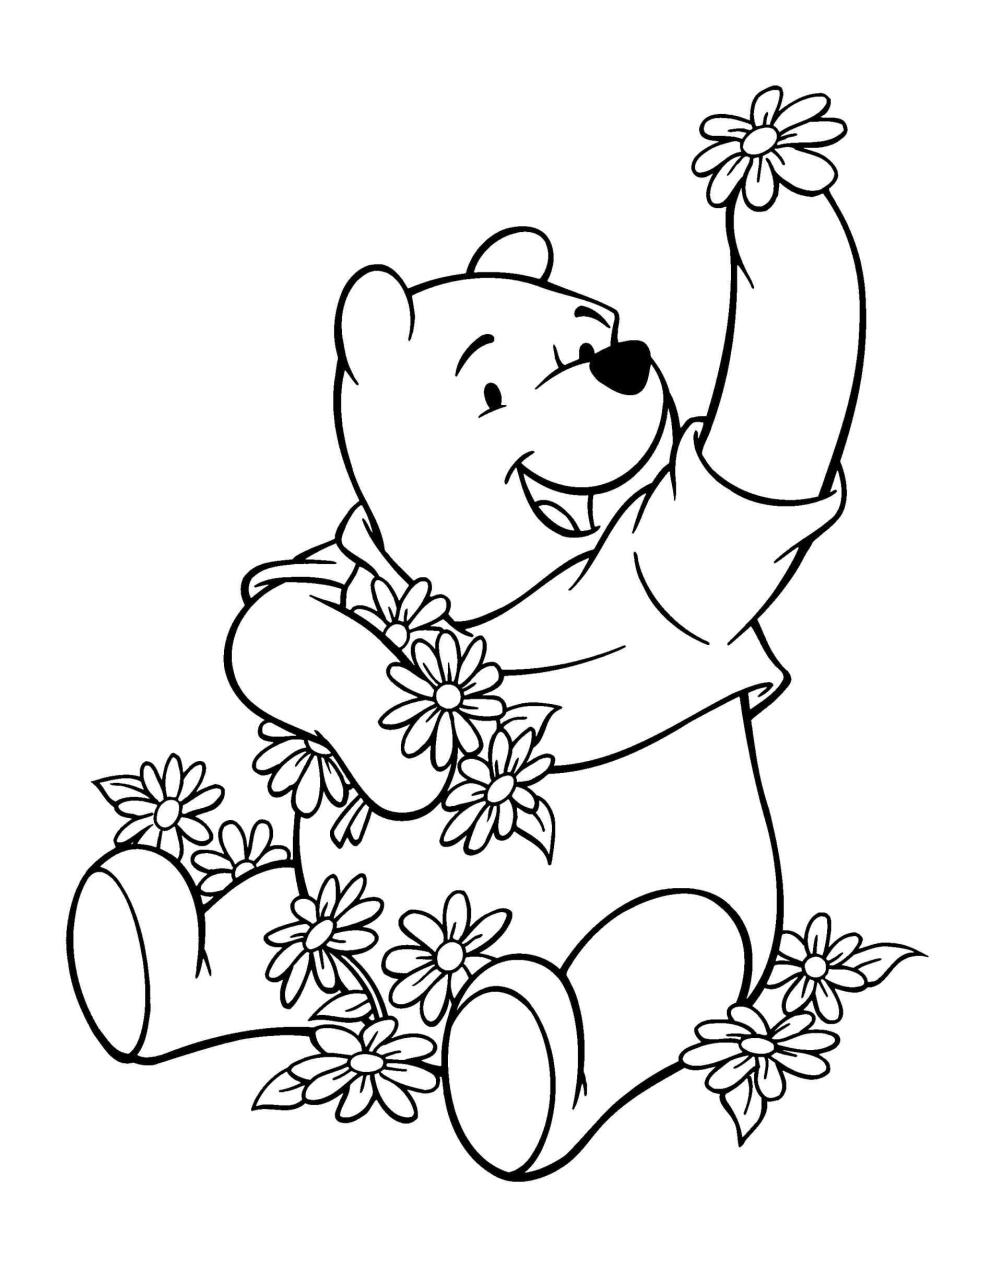 St Patrick Day Coloring Pages Disney at Free